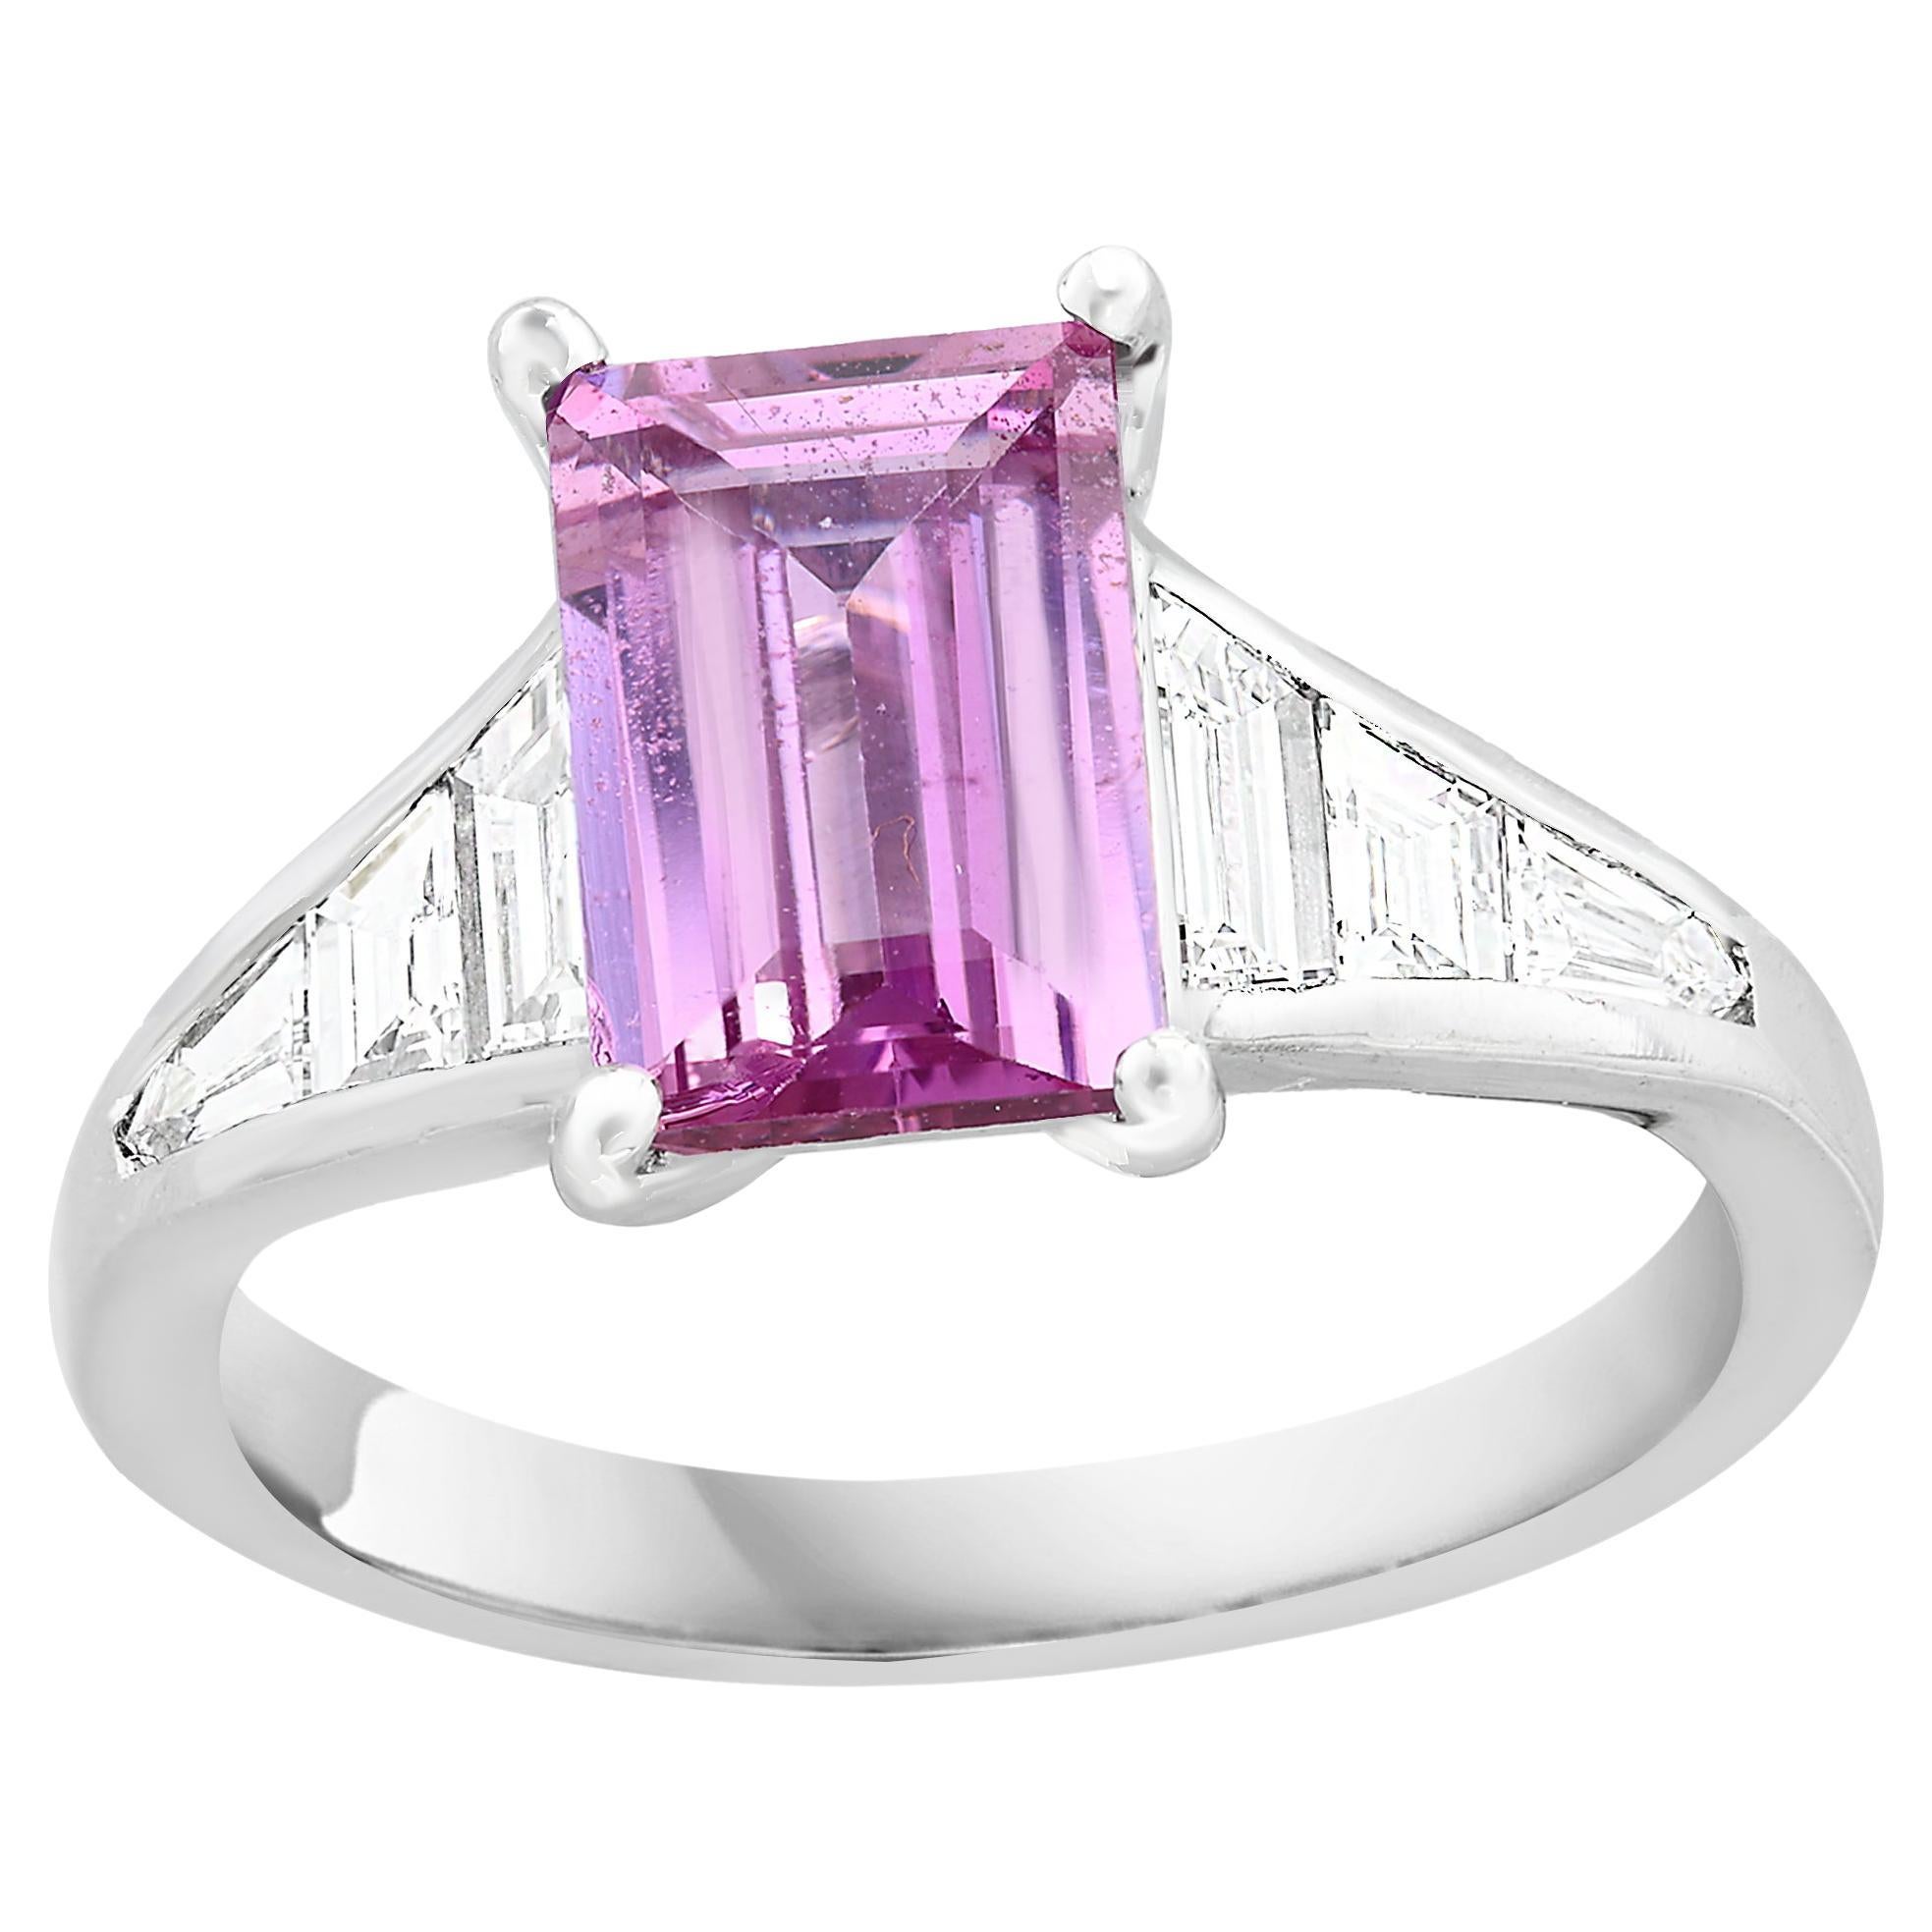 2.21 Carat Emerald Cut Pink Sapphire and Diamond Engagement Ring in Platinum For Sale